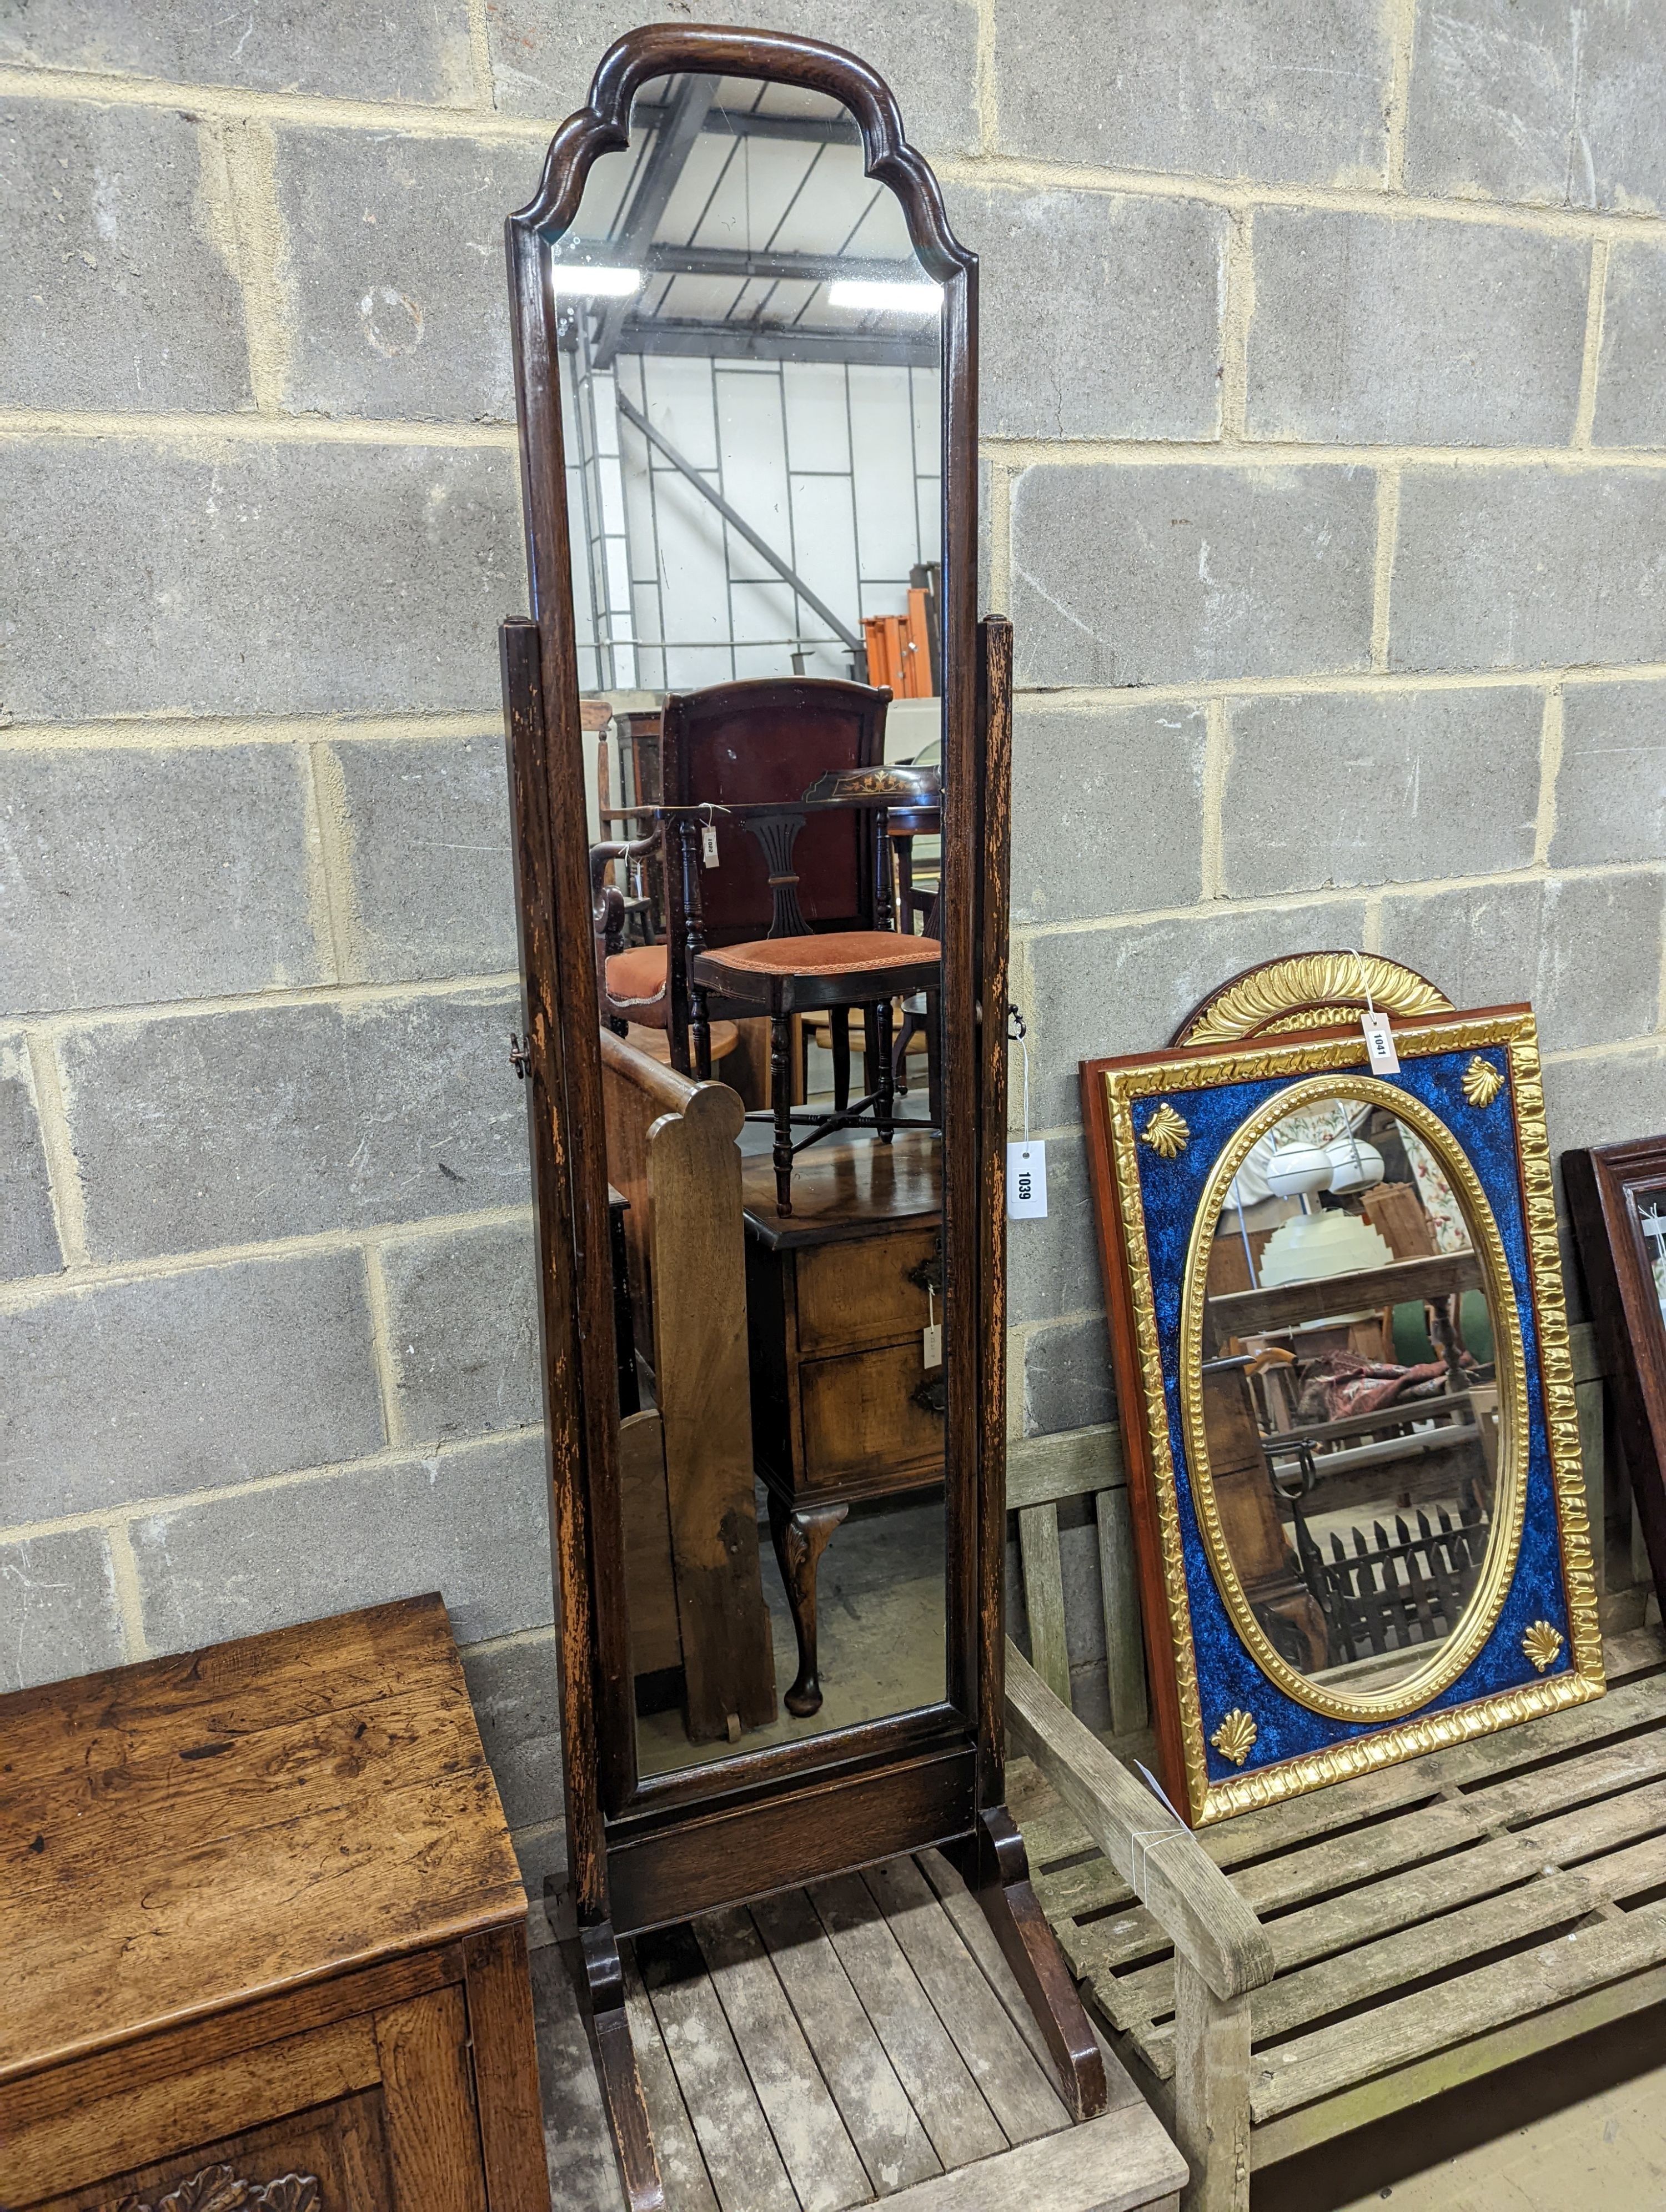 A Queen Anne revival beech and walnut cheval mirror, width 40cm, height 163cm